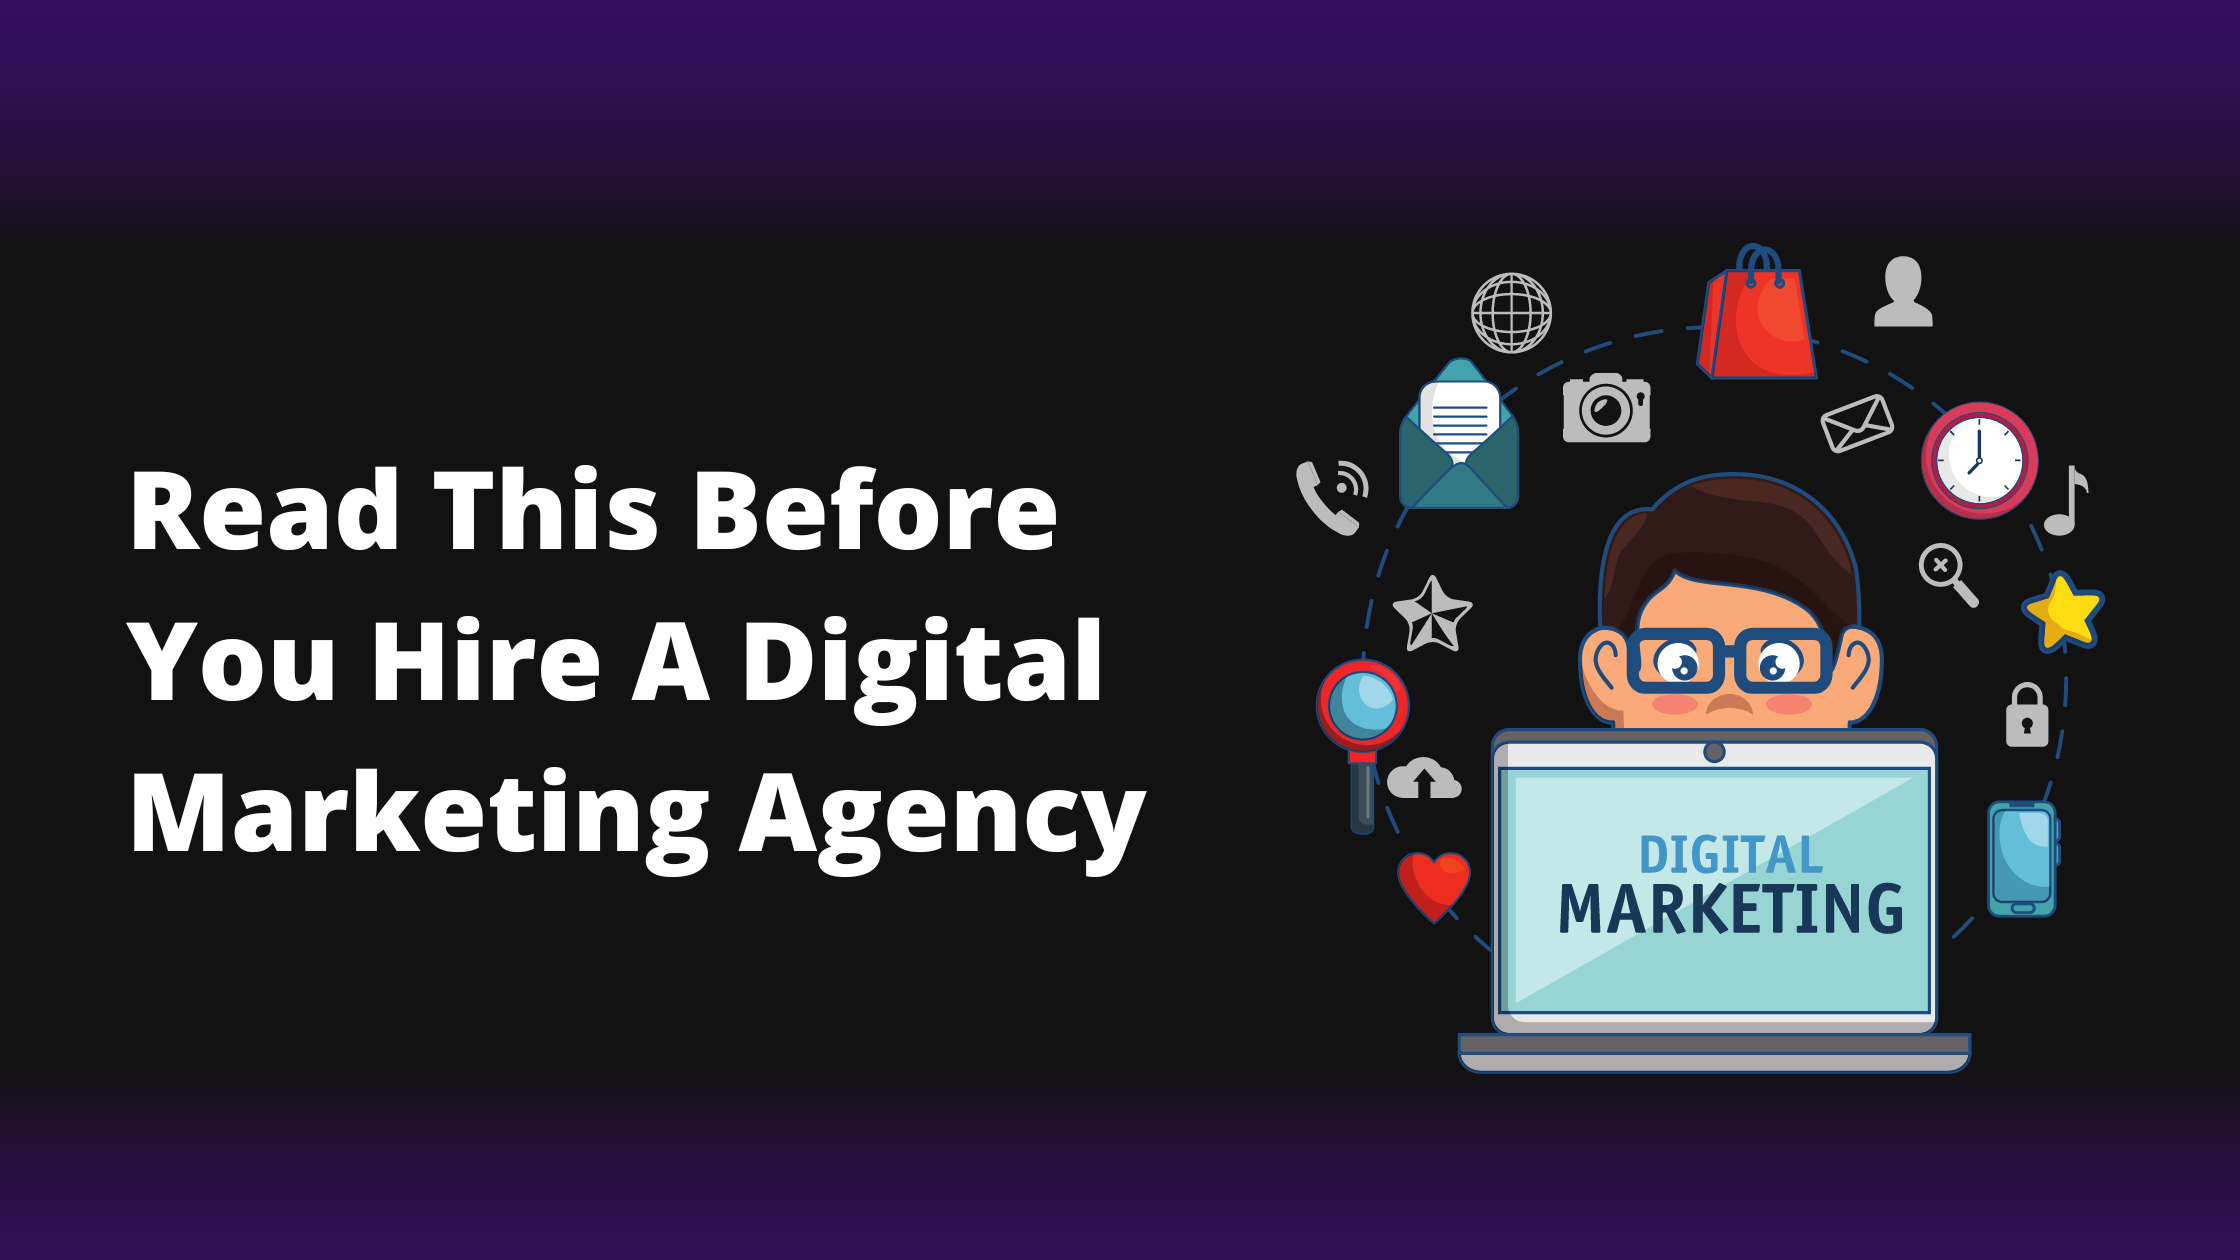 Read This Before You Hire A Digital Marketing Agency